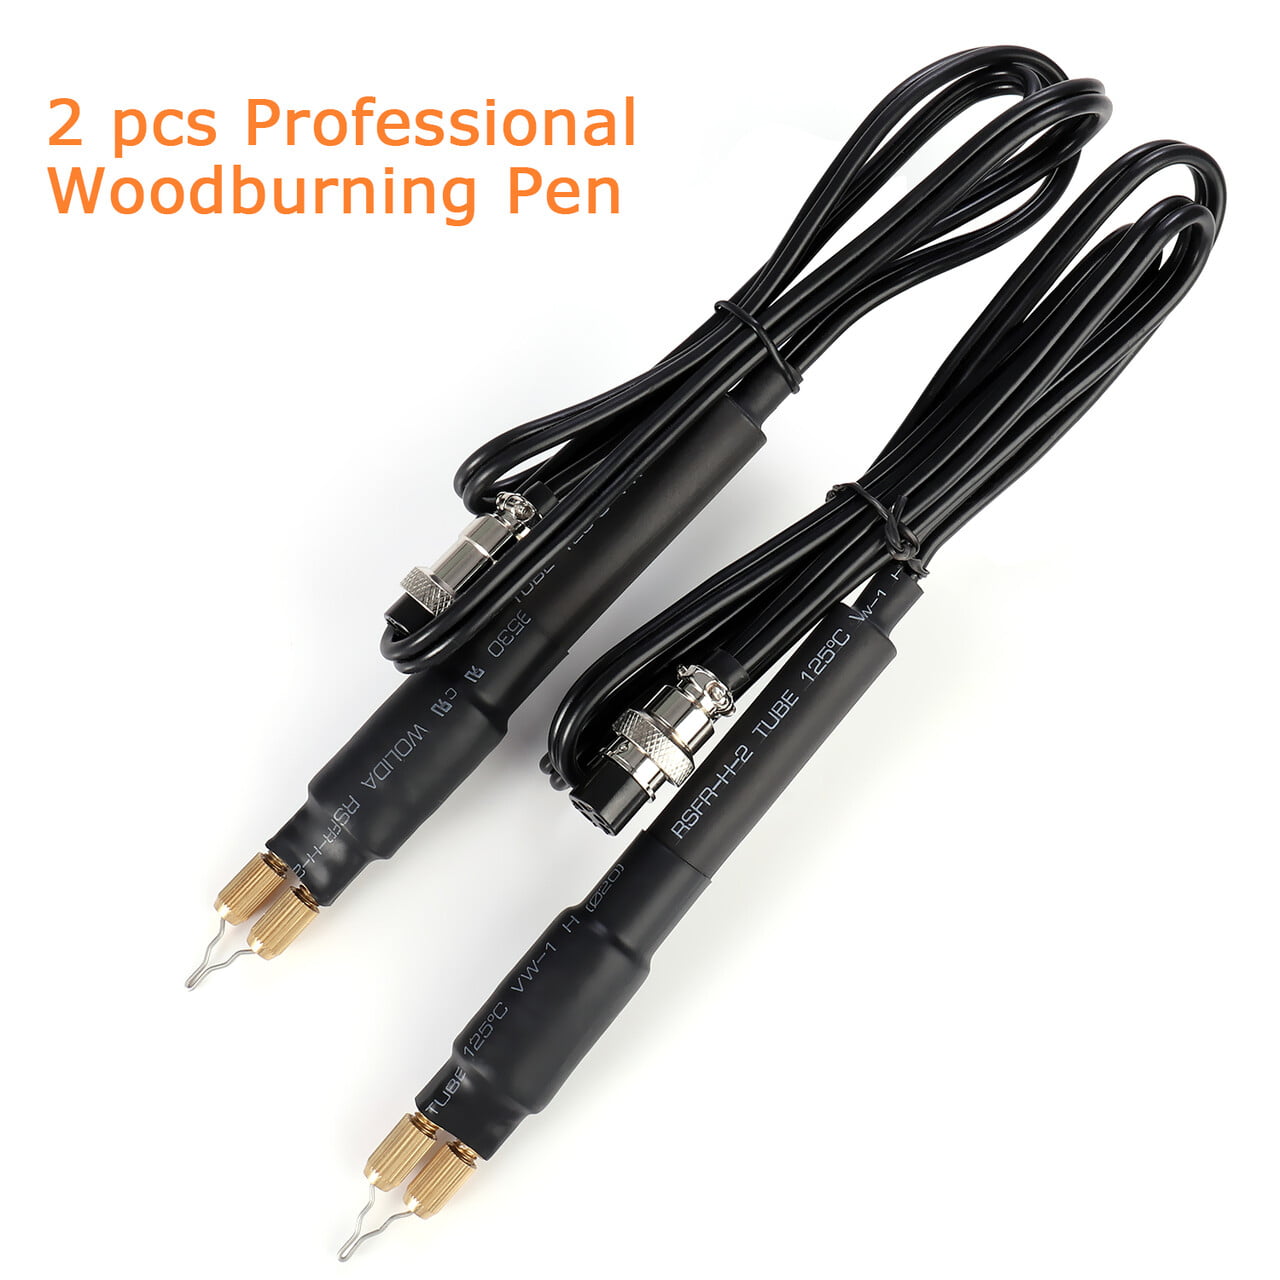 Professional Wood Burning Kit， 60W Pro Pyrography Pen Wood Burner with 24  Wire Nibs Tips Including Ball Tips， Wood Burning kit for adults and